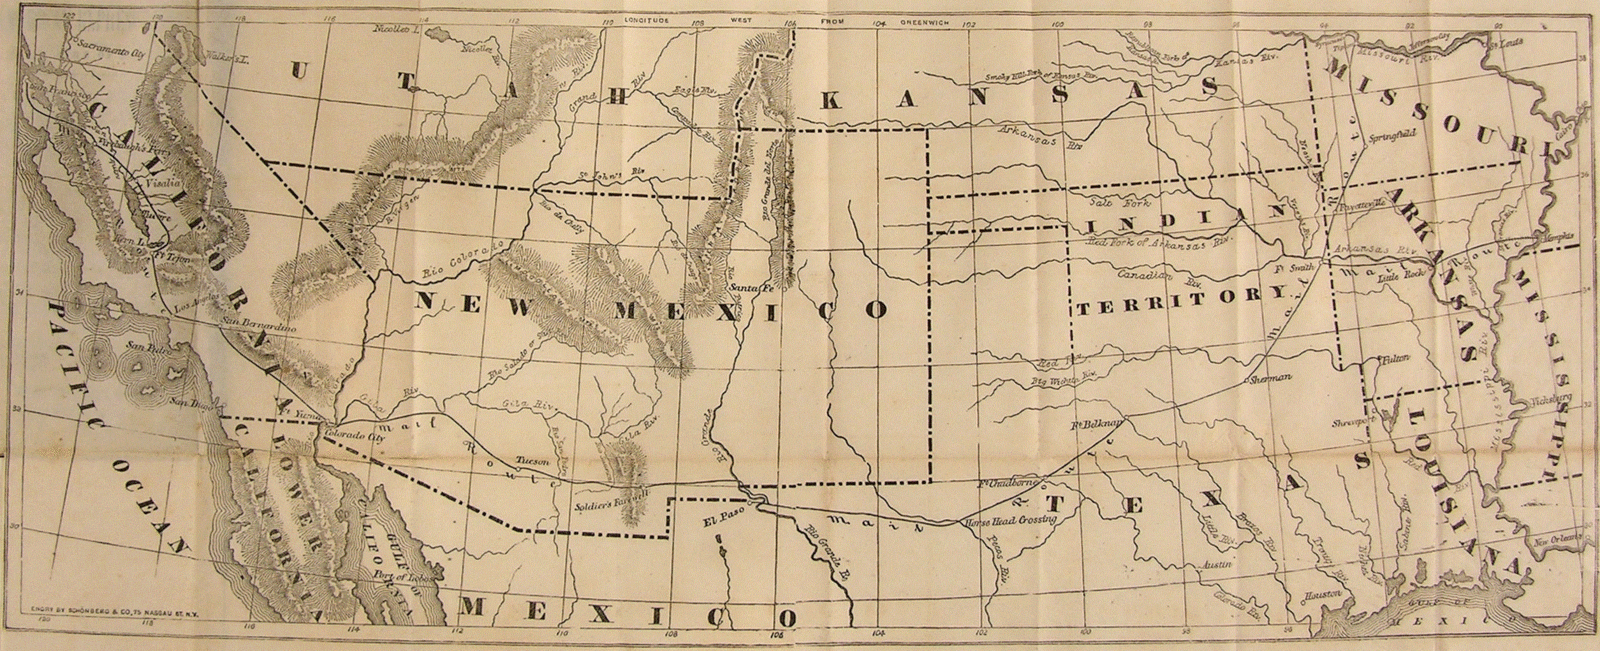 Butterfield Overland Mail Route